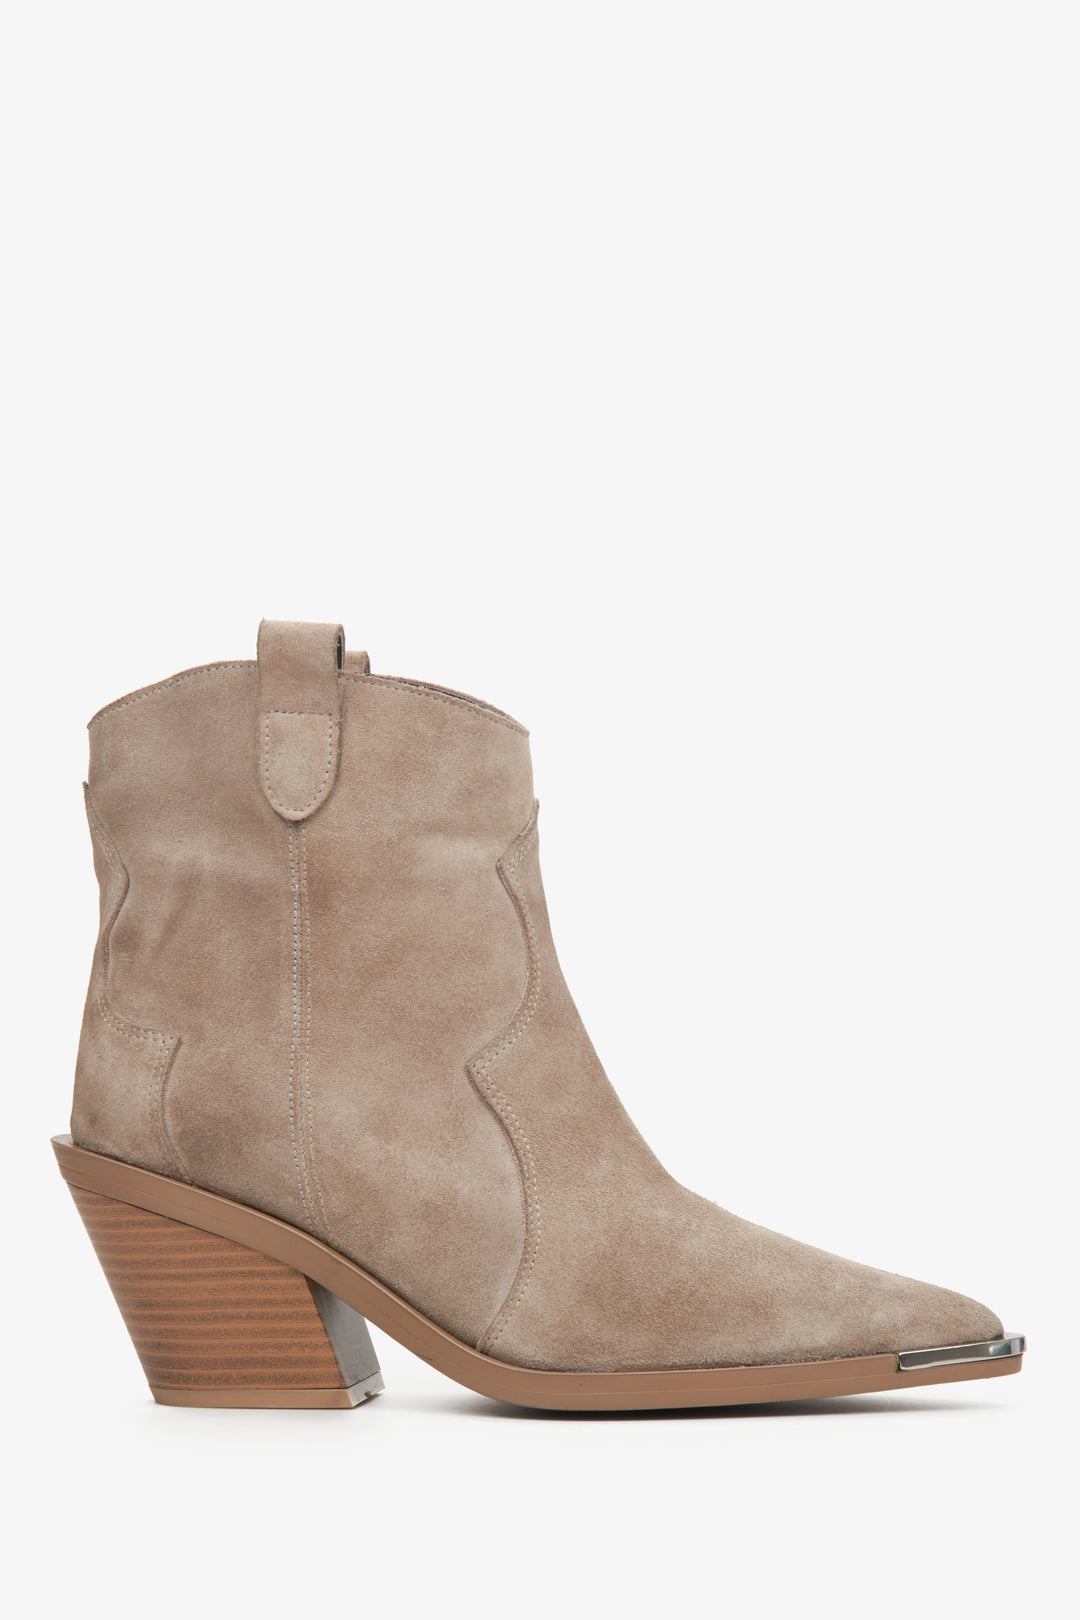 Women's Light Beige Suede Cowoy Boots with Silver Accents Estro ER00113827